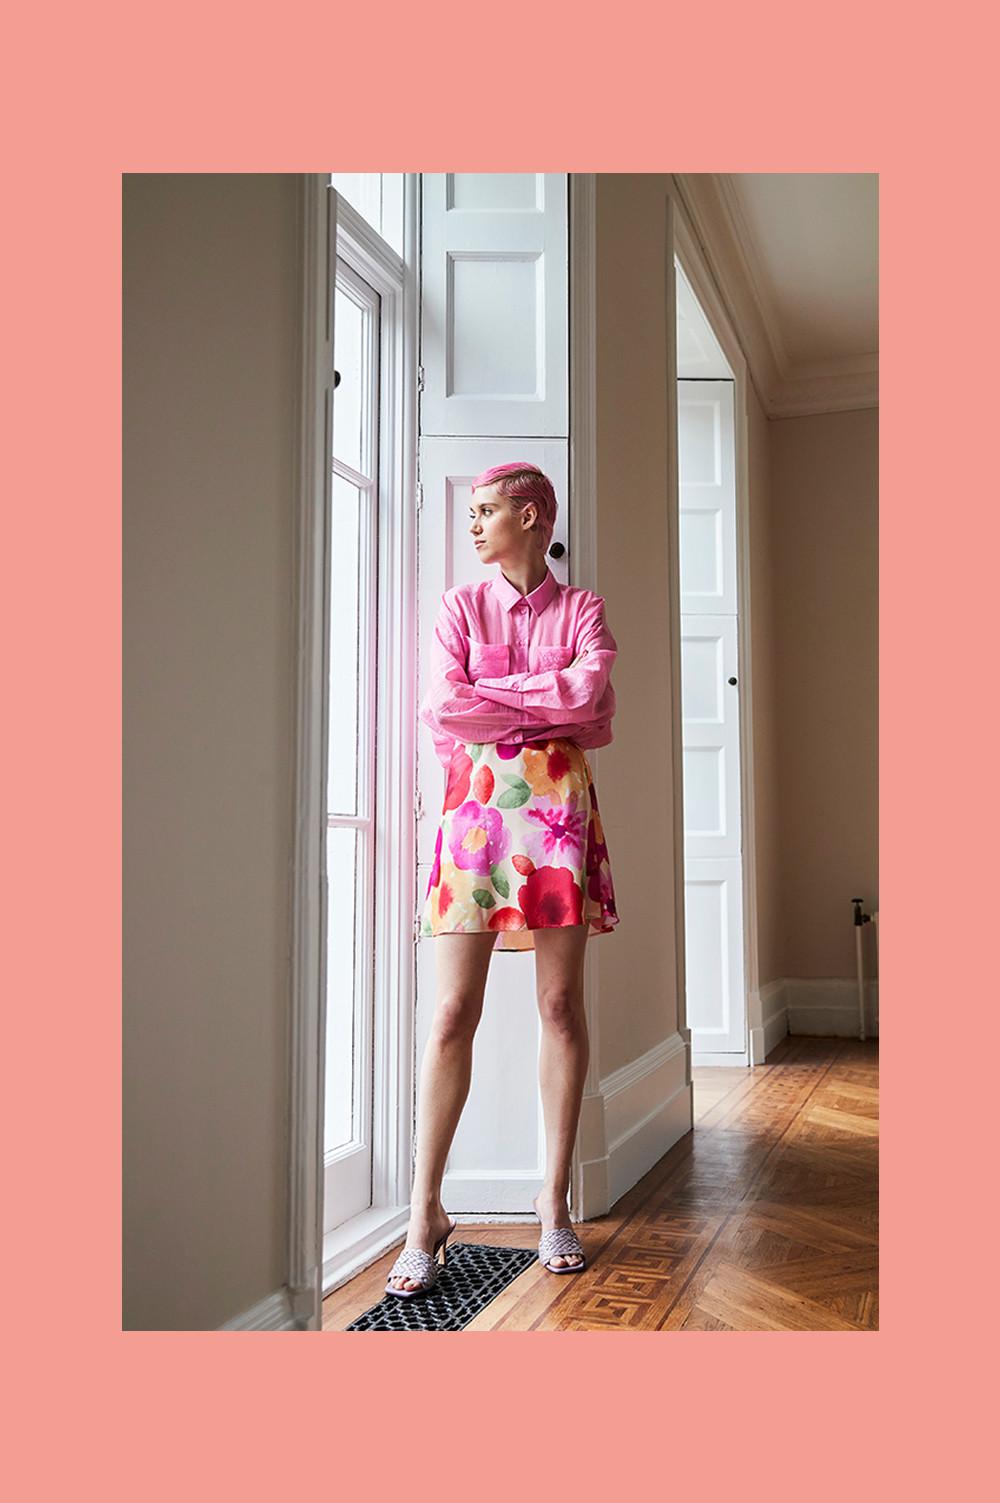 Model wearing pink shirt and floral dress